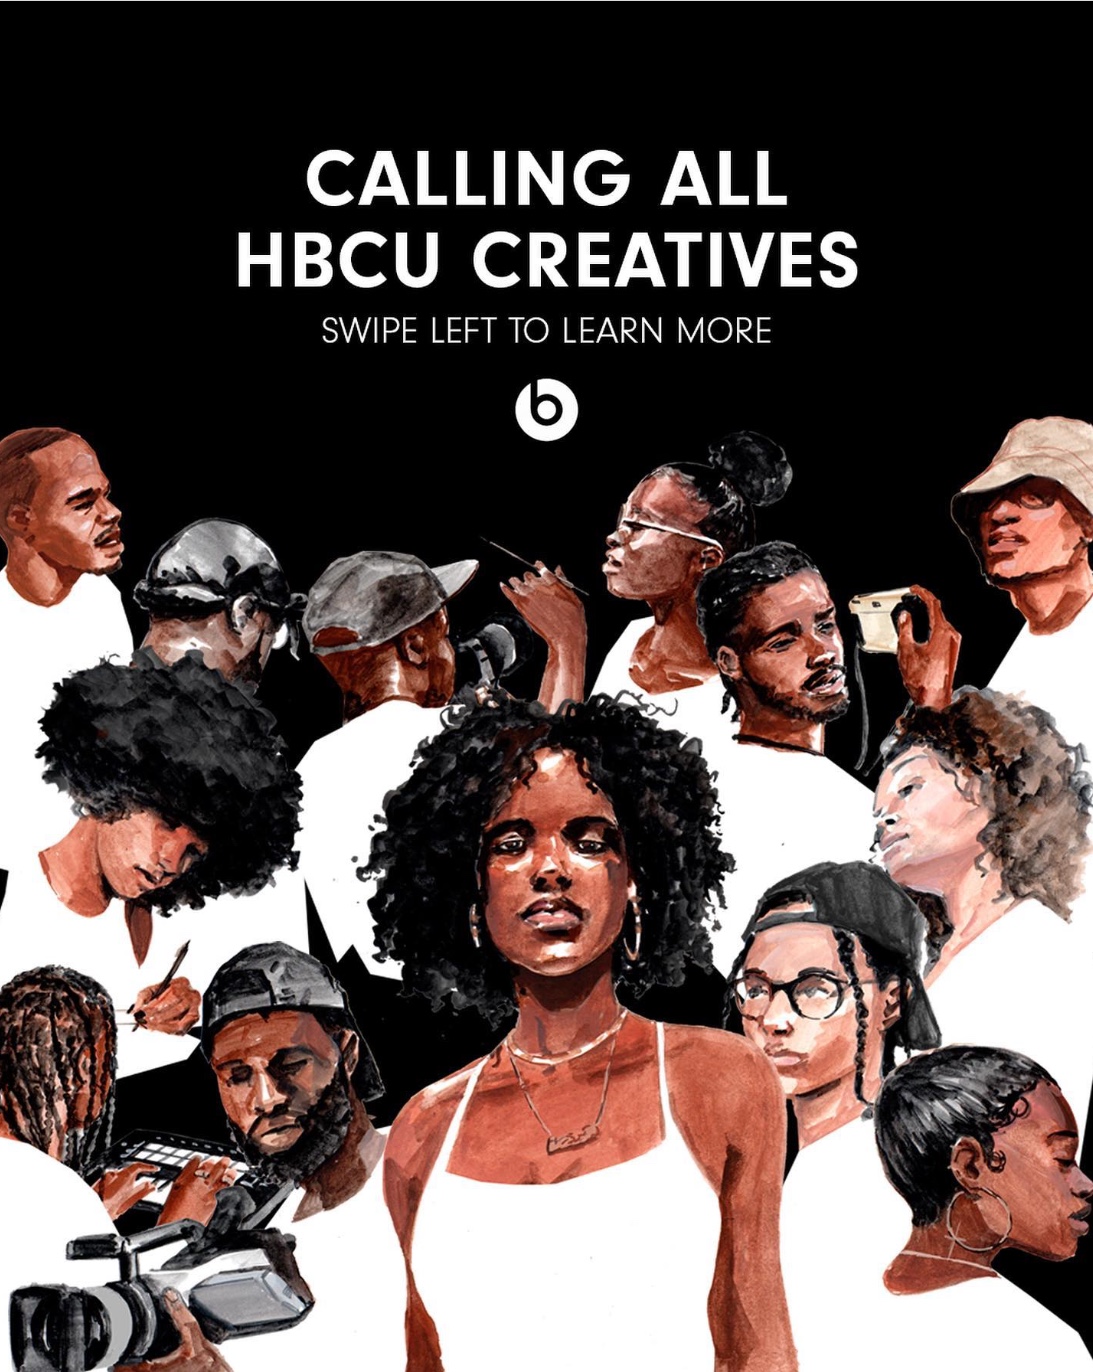 Beats By Dre Reveils New Initiative for HBCU Students and Graduates